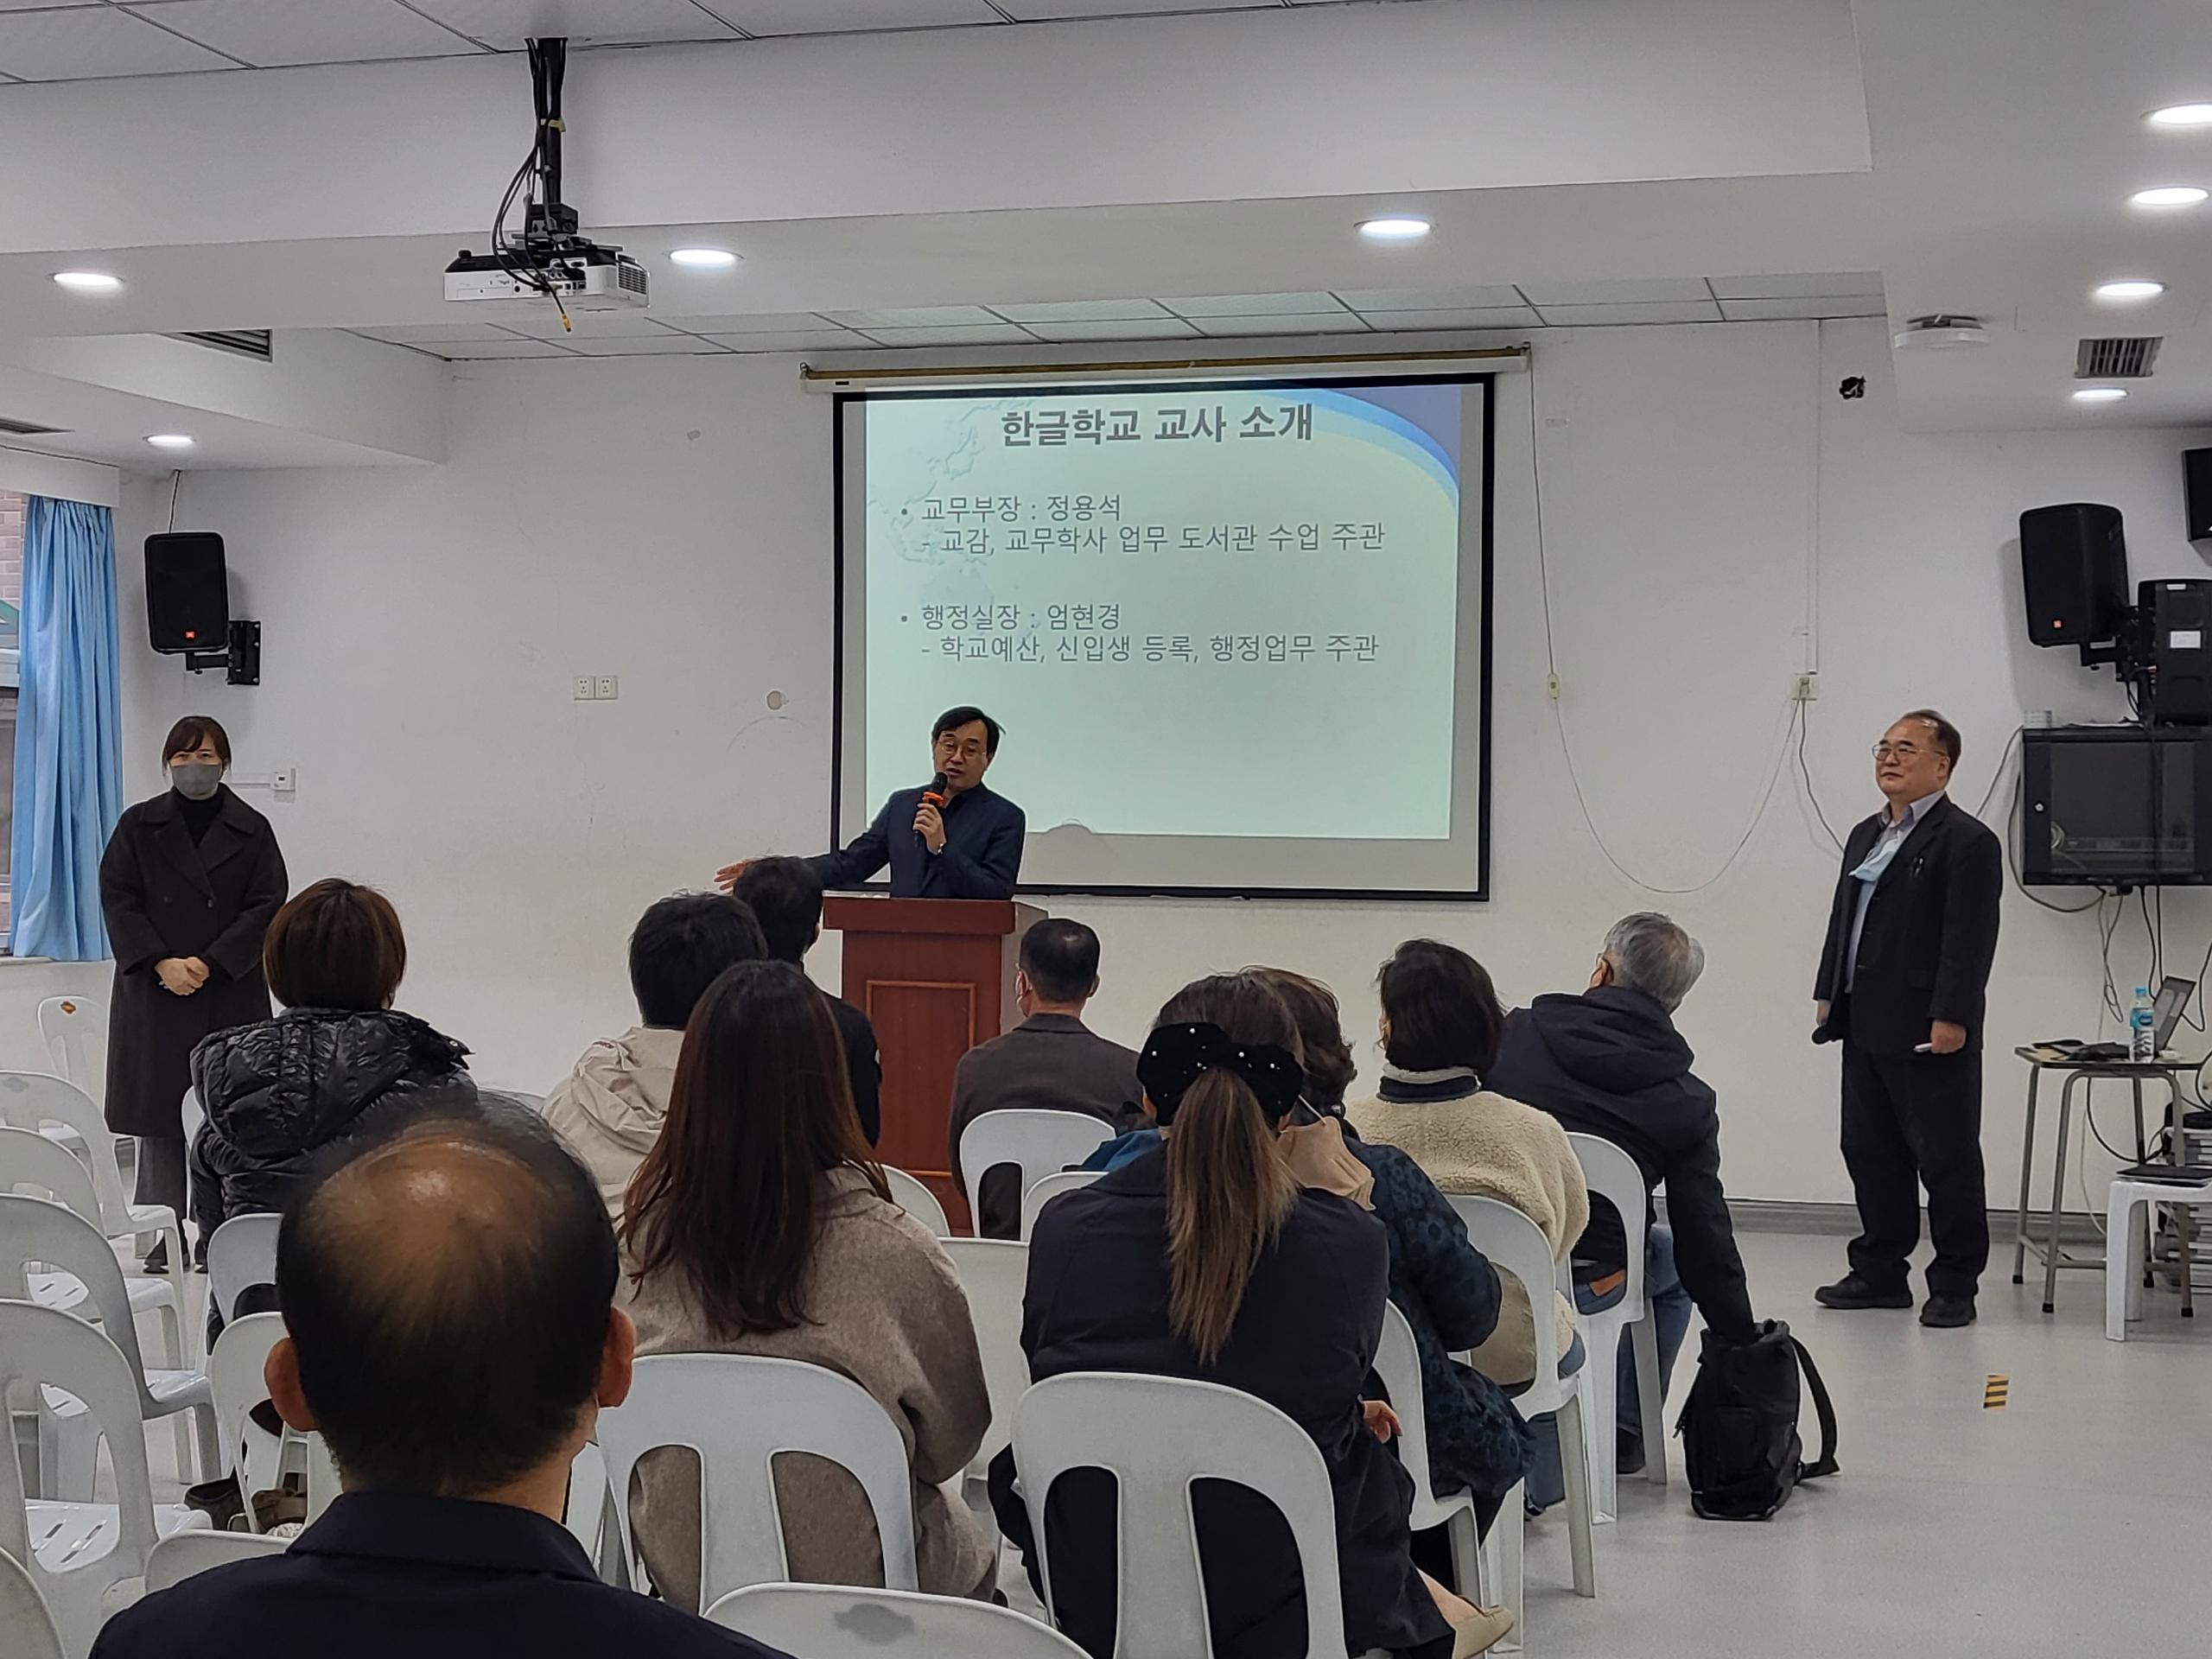 Principal delivers keynote remarks during a parents' meeting of the Hangeul School in Beijing